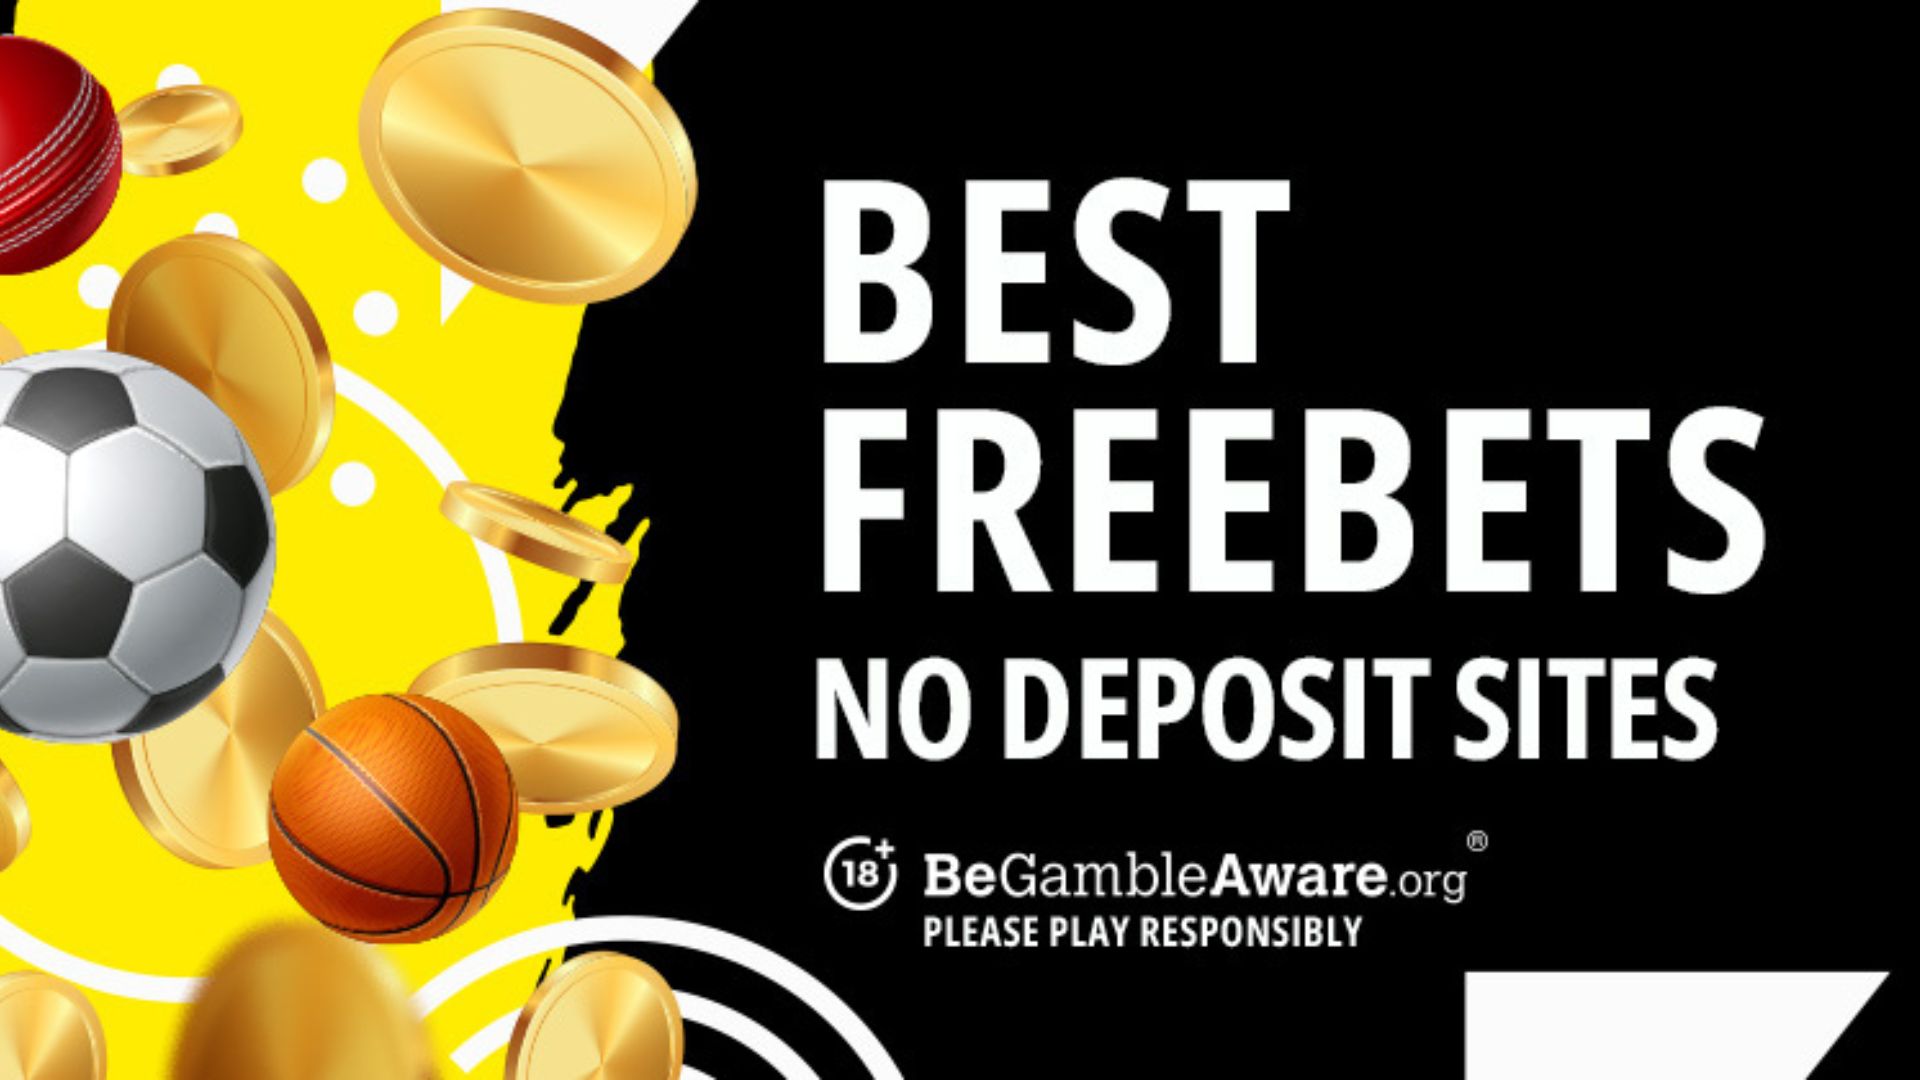 Free Sports Bet No Deposit Required